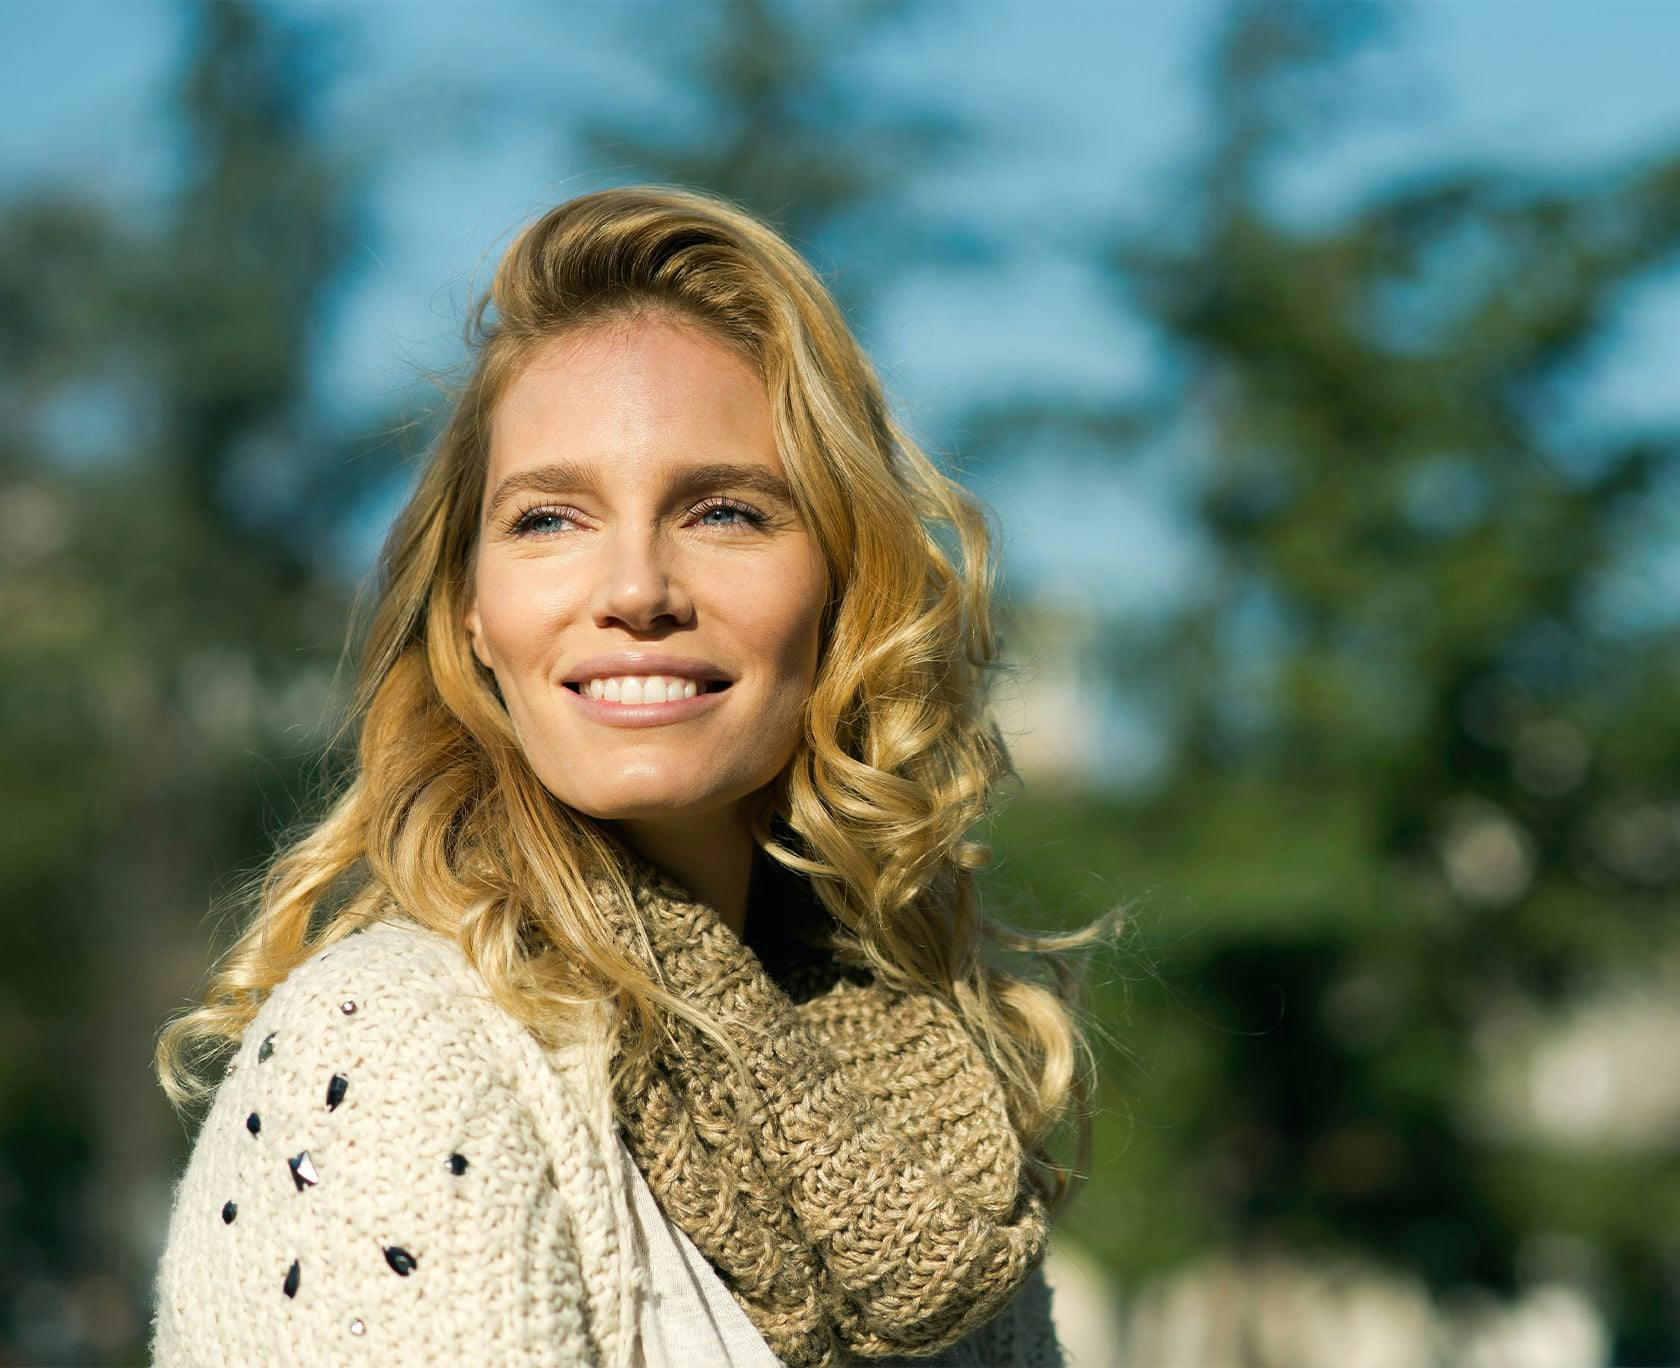 Blonde woman in a scarf smiling